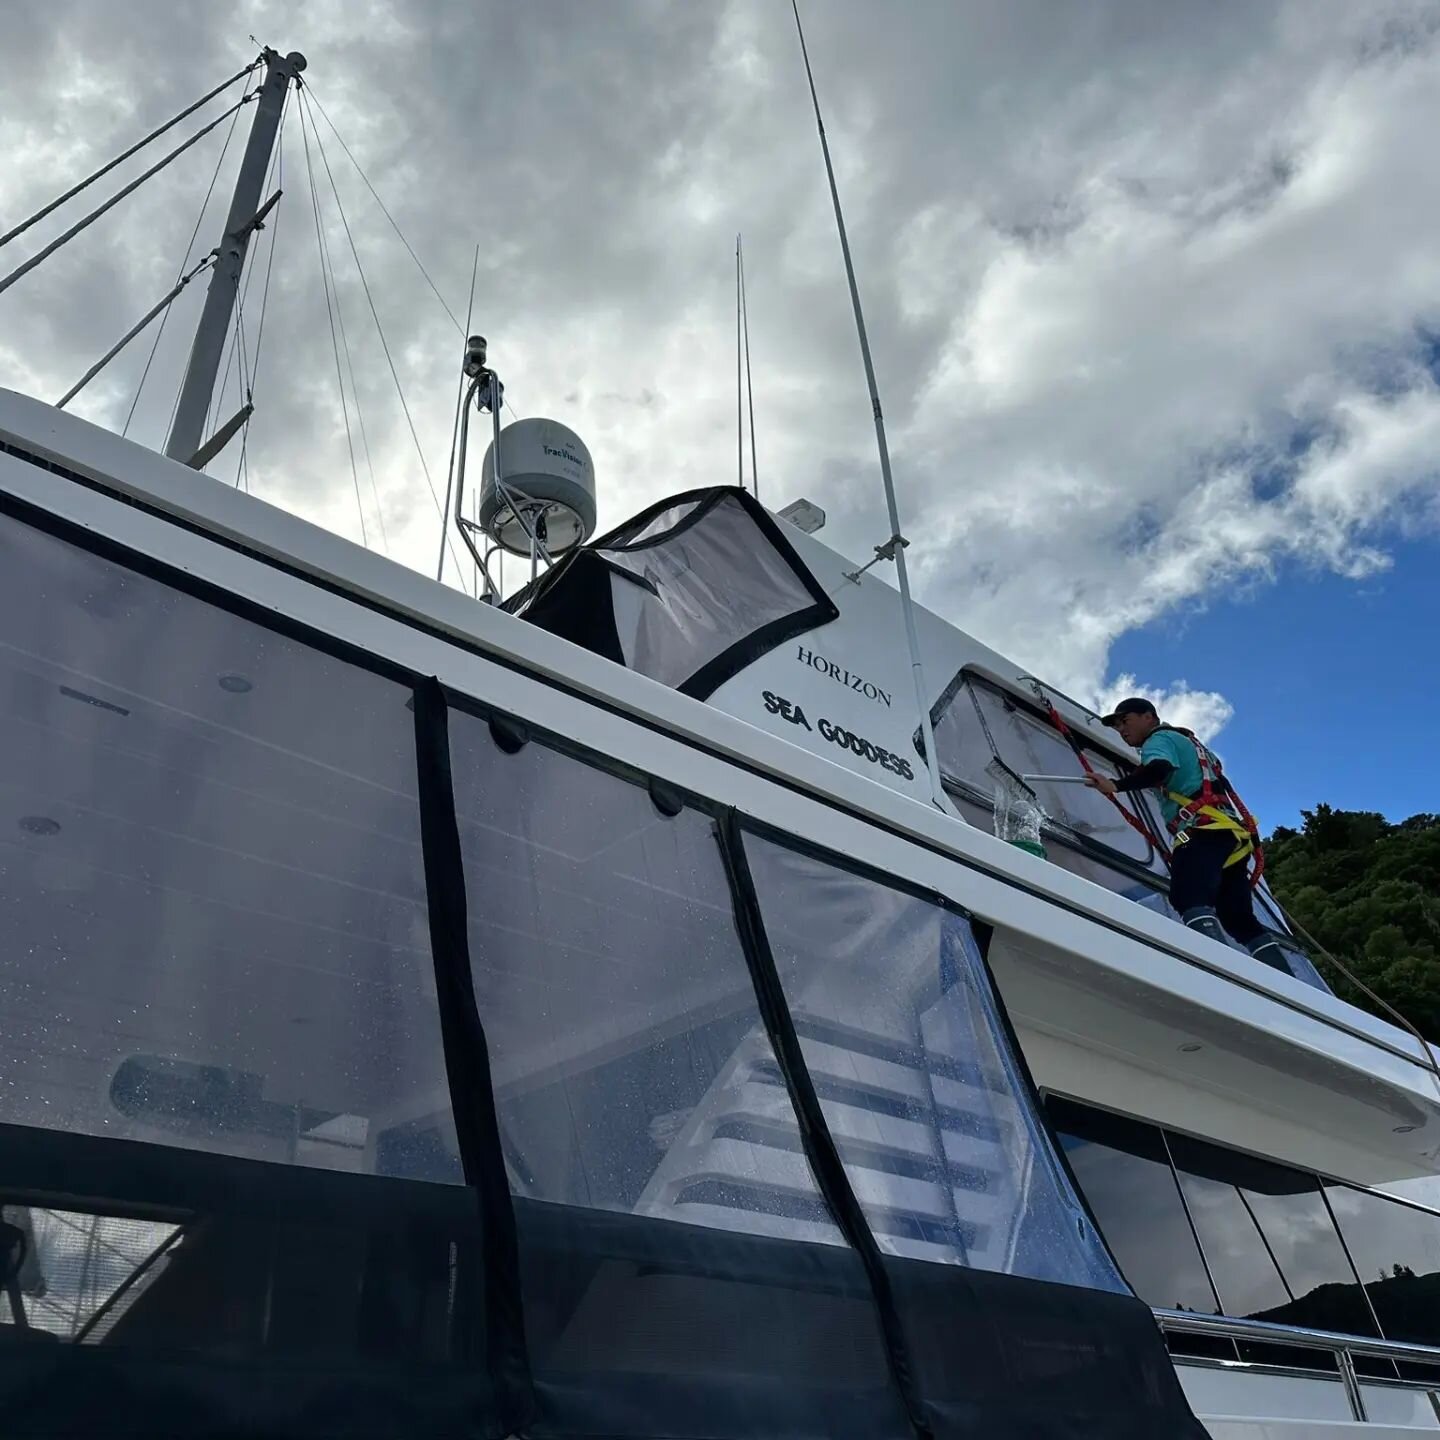 We will wash all your worries away by providing everything your boat needs to be and look neat.

We are your friendly boat detailing company in Marlborough, that counts with the highest quality and reliable services. 

You know that keeping your boat